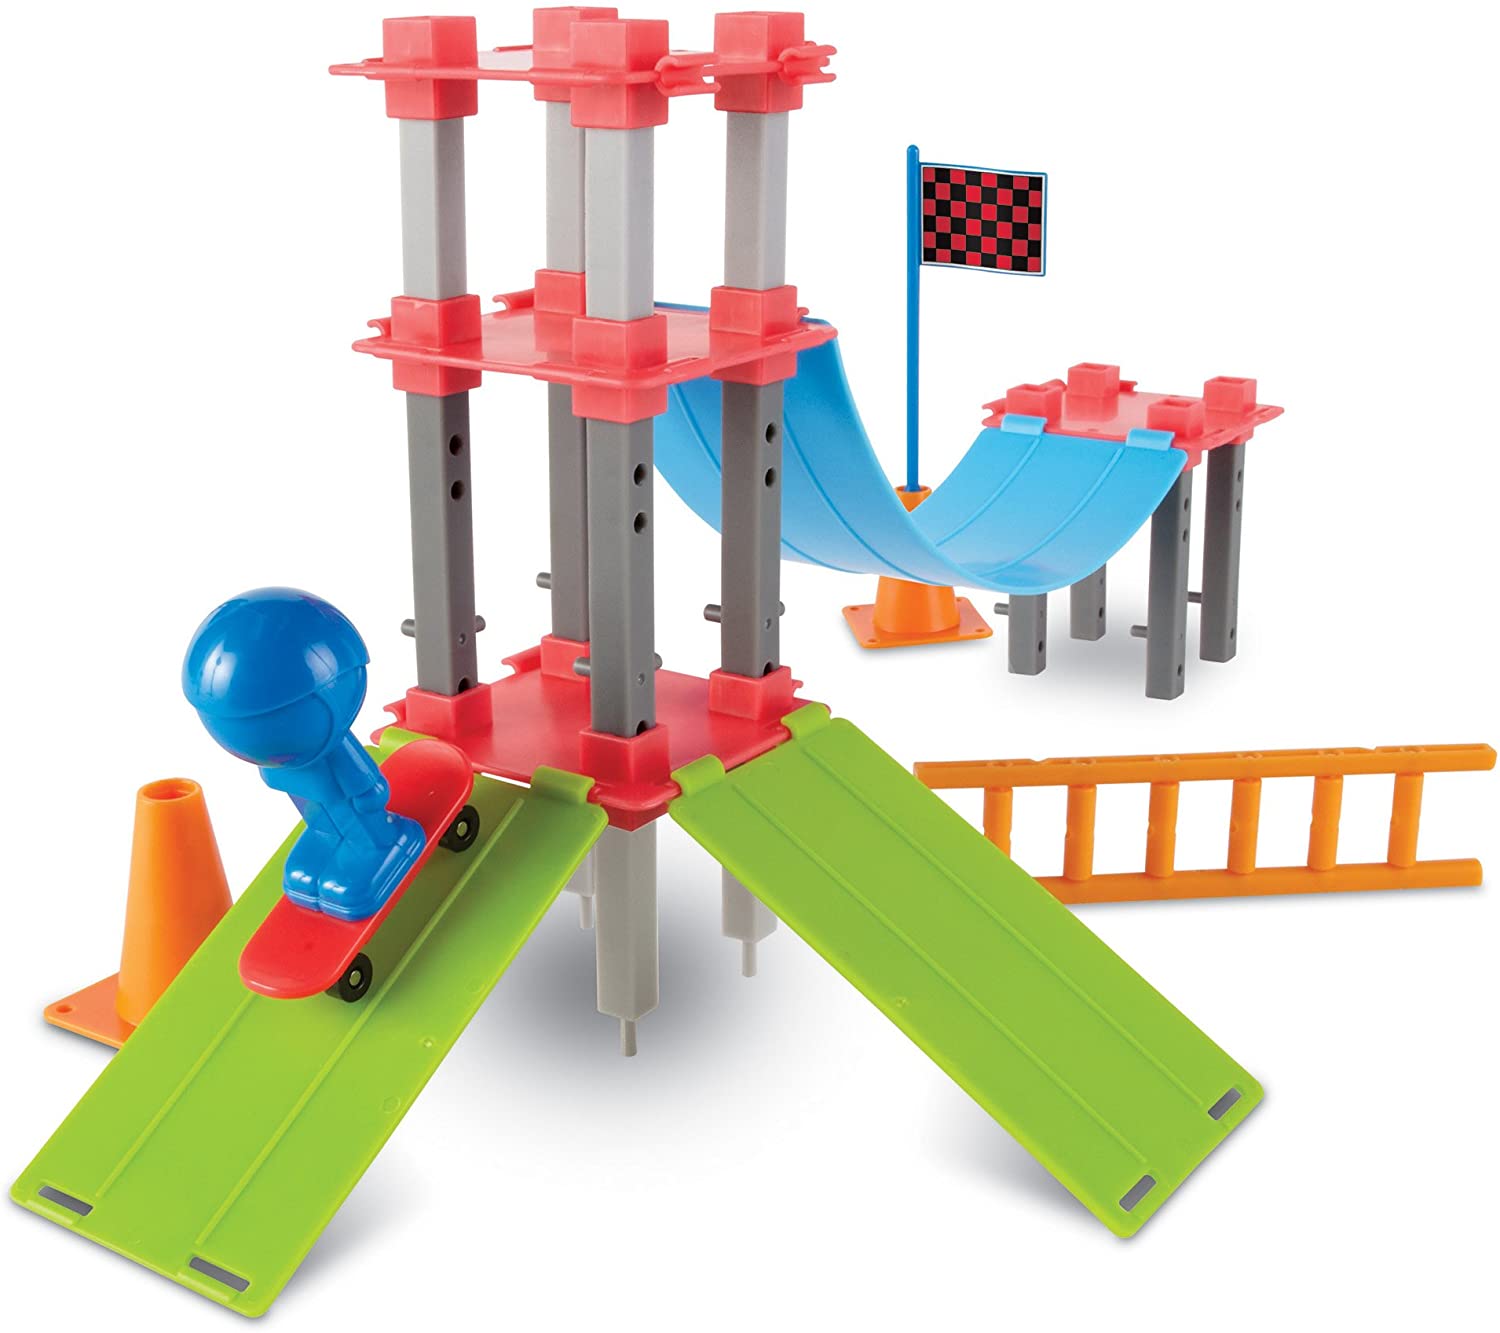 43-Pc Learning Resources Skate Park Engineering & Design Building Set $5 + free shipping w/ Prime or on orders over $25